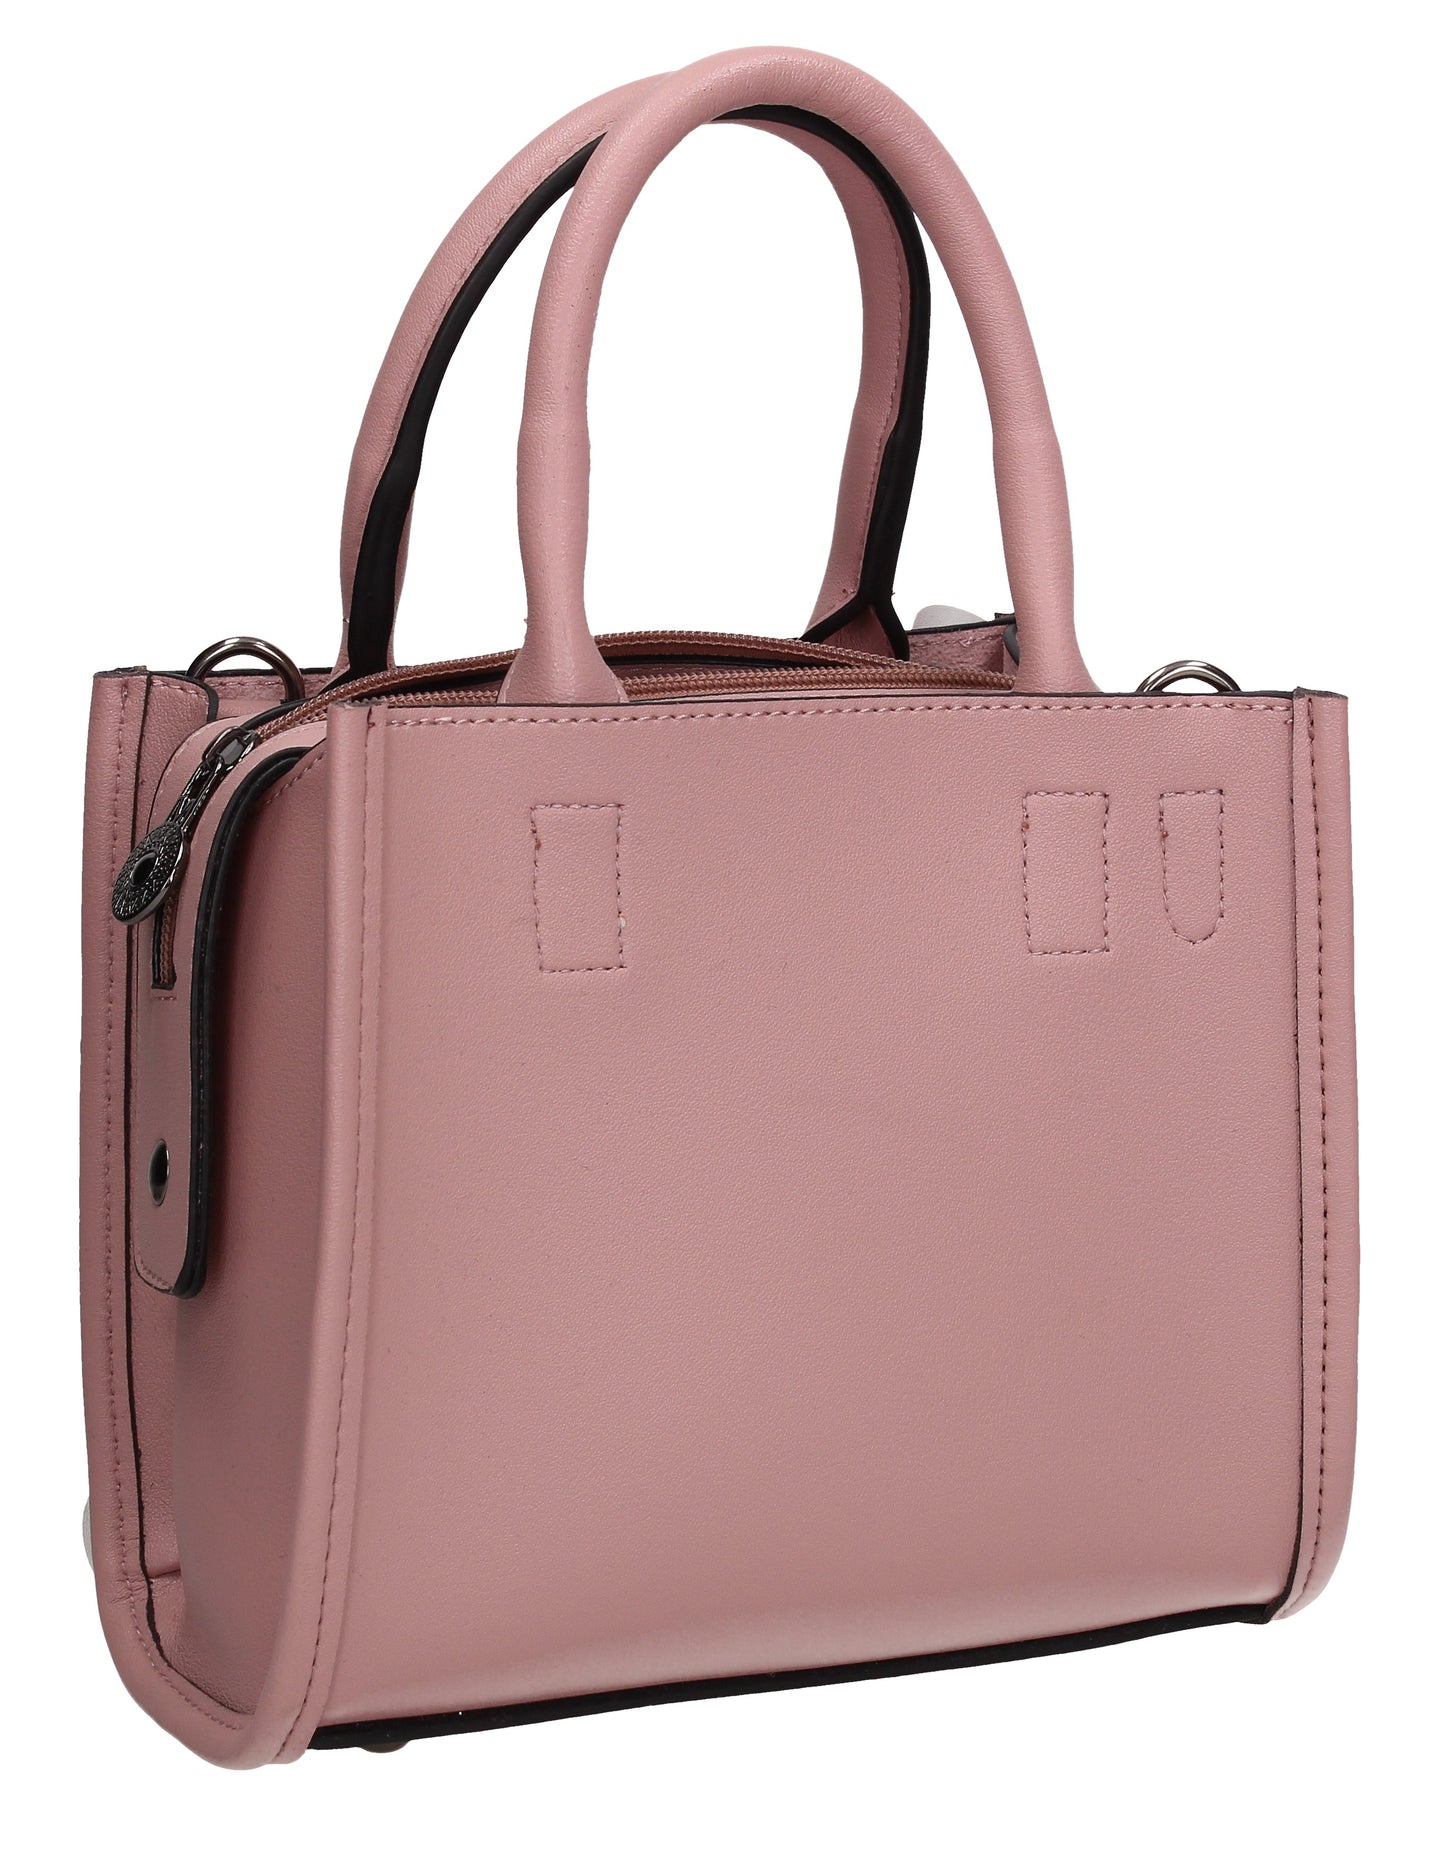 Buy your Sage Handbag Pink Today! Buy with confidence from Swankyswans